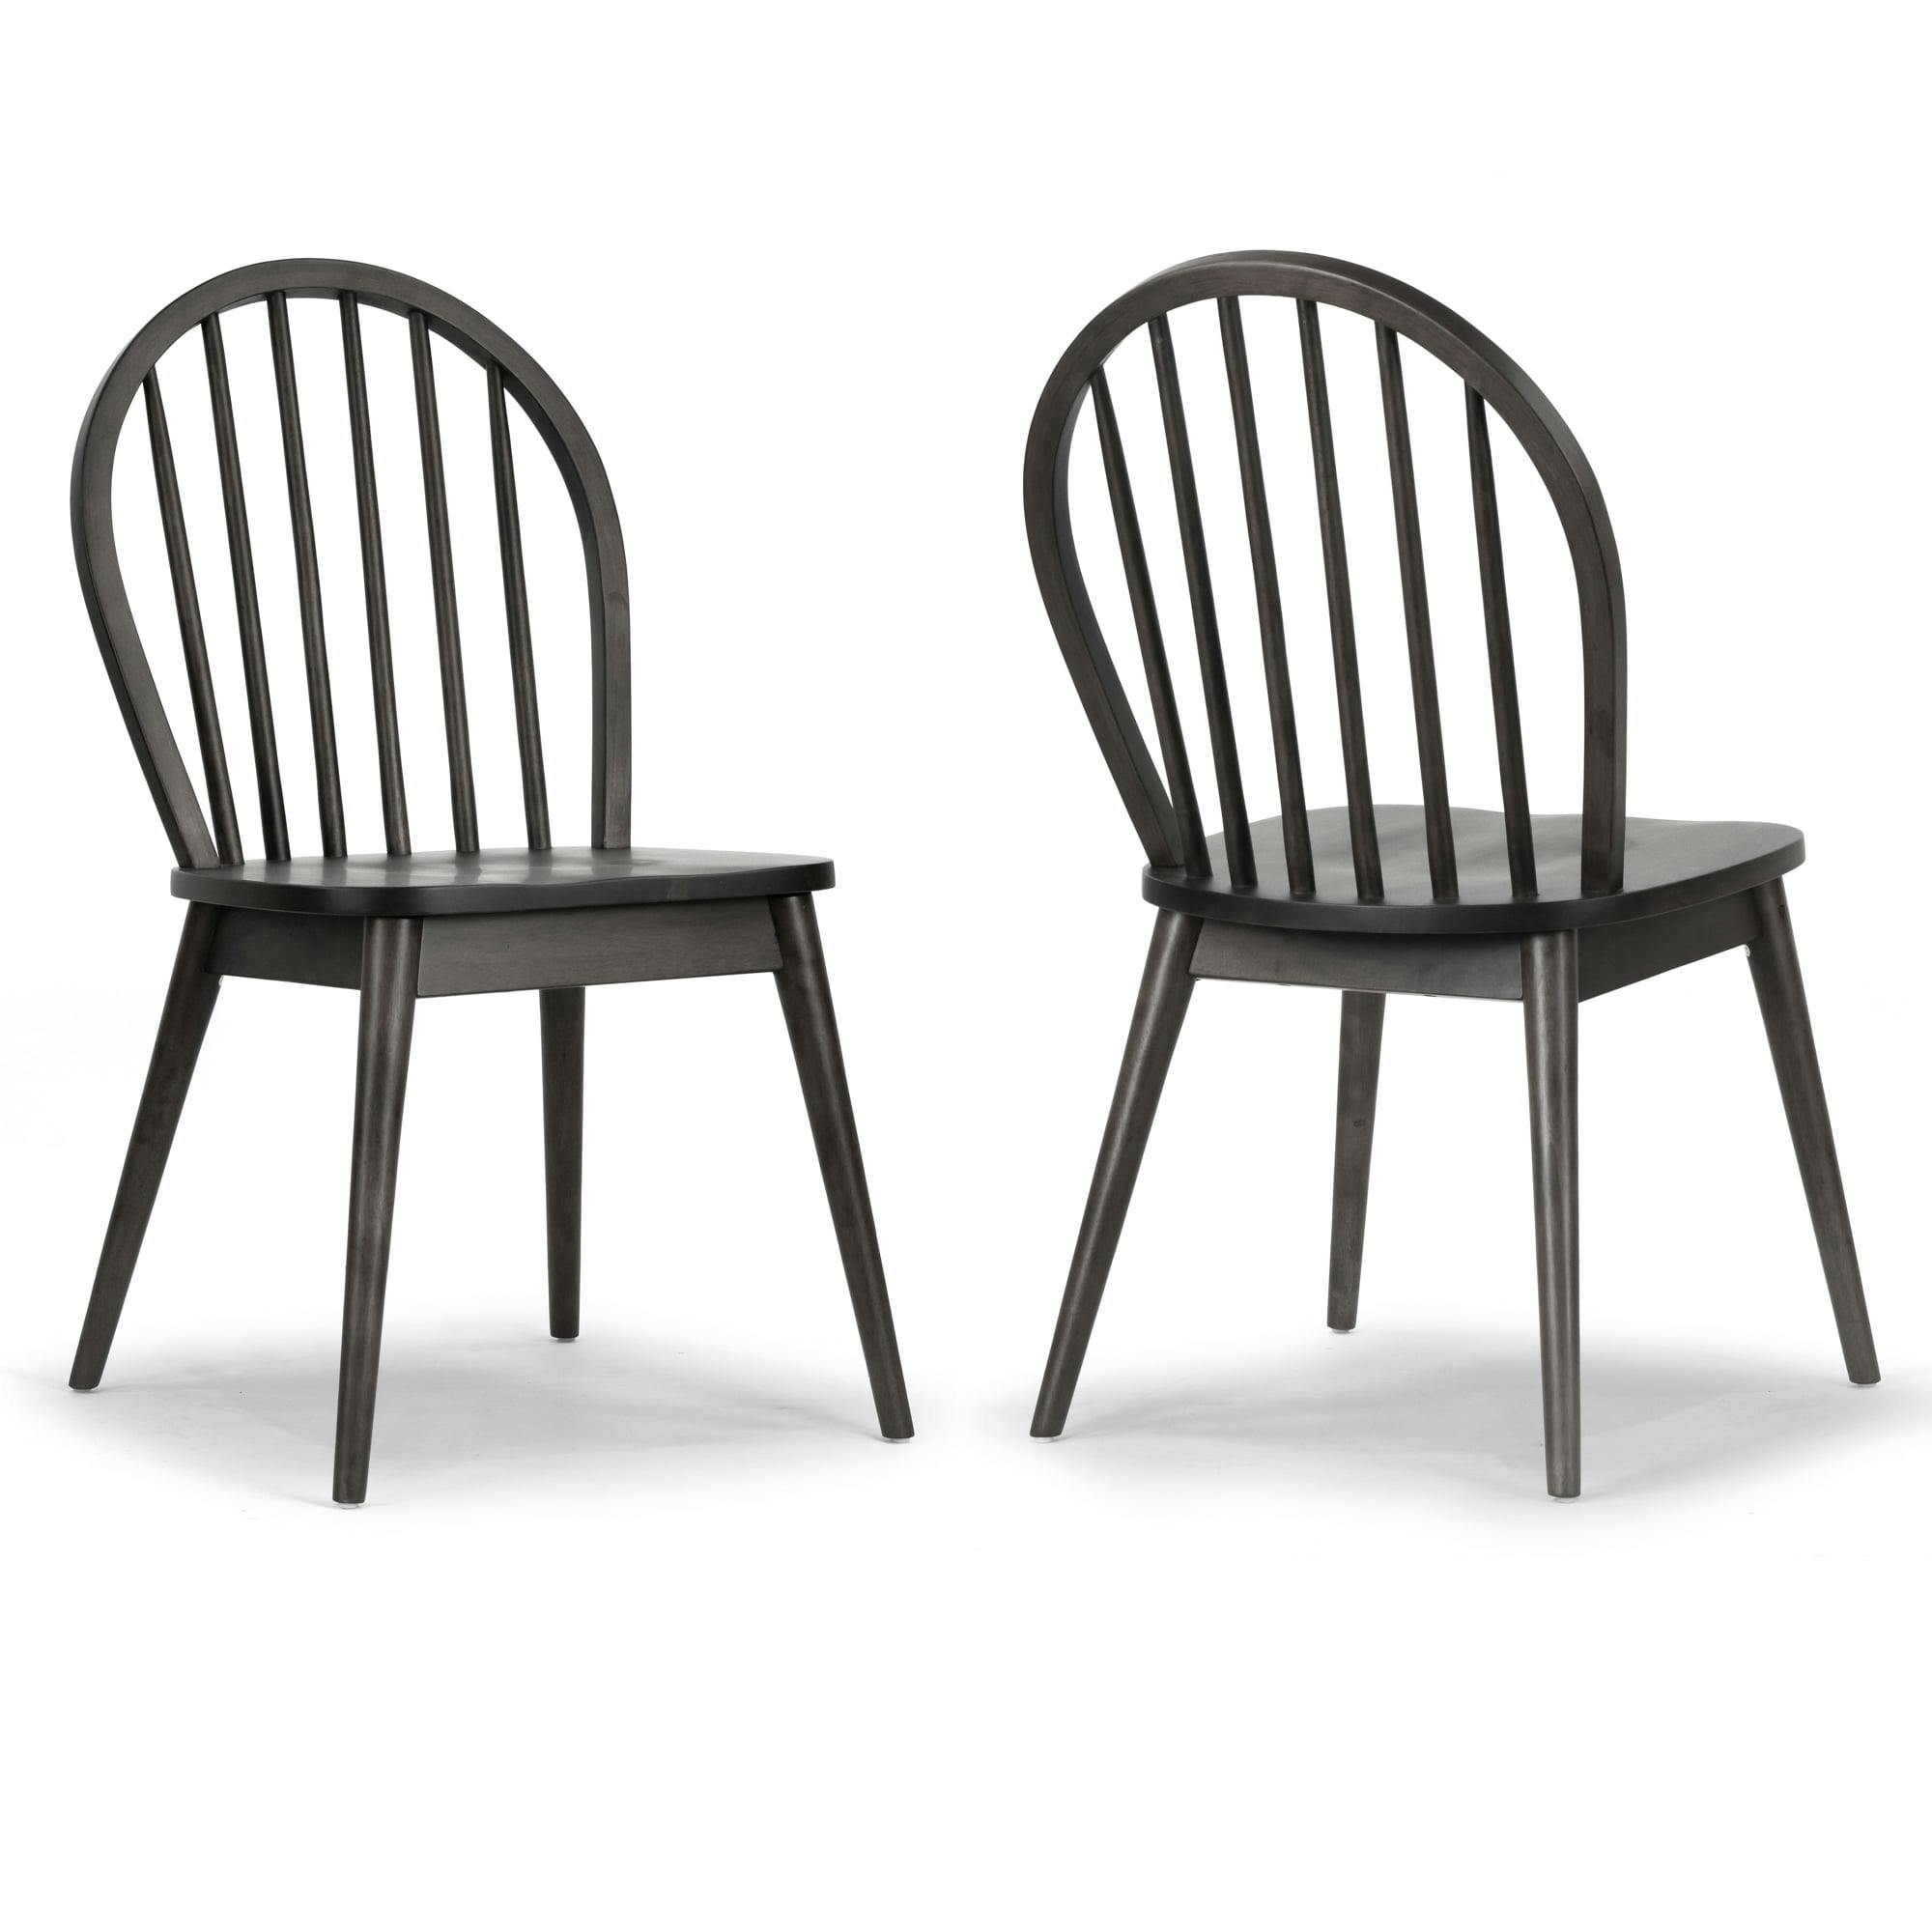 Classic Black Windsor Slat Side Chair in Solid Wood